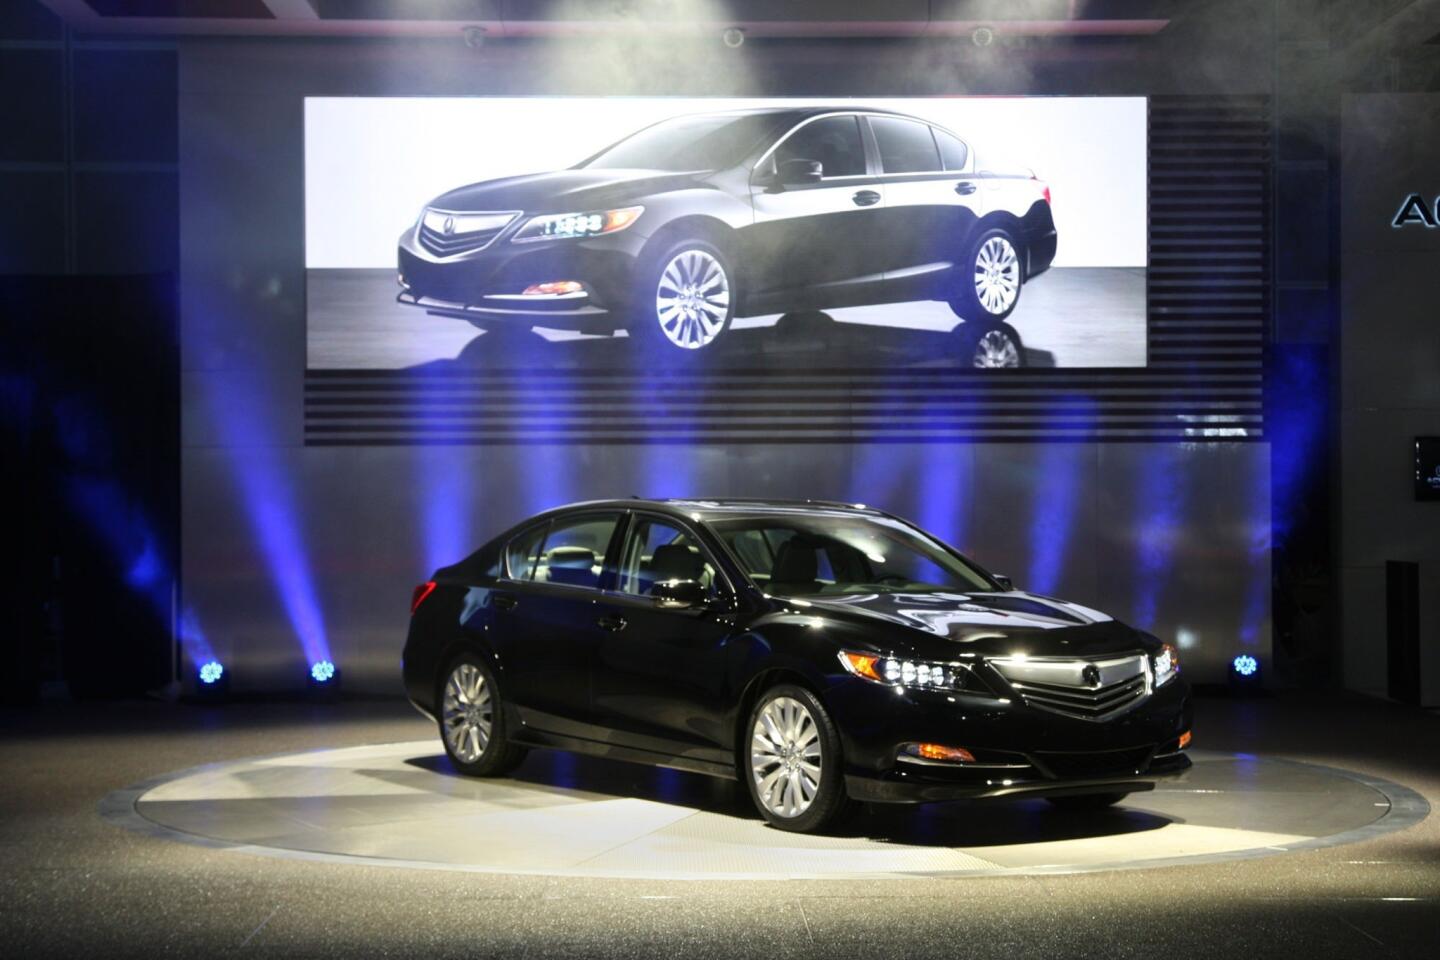 Acura is confronted with a marketing conundrum: How to brand the RLX as a luxury rival to BMW or Lexus rather than just a more expensive Honda. It will be unveiled at the L.A. Auto Show.